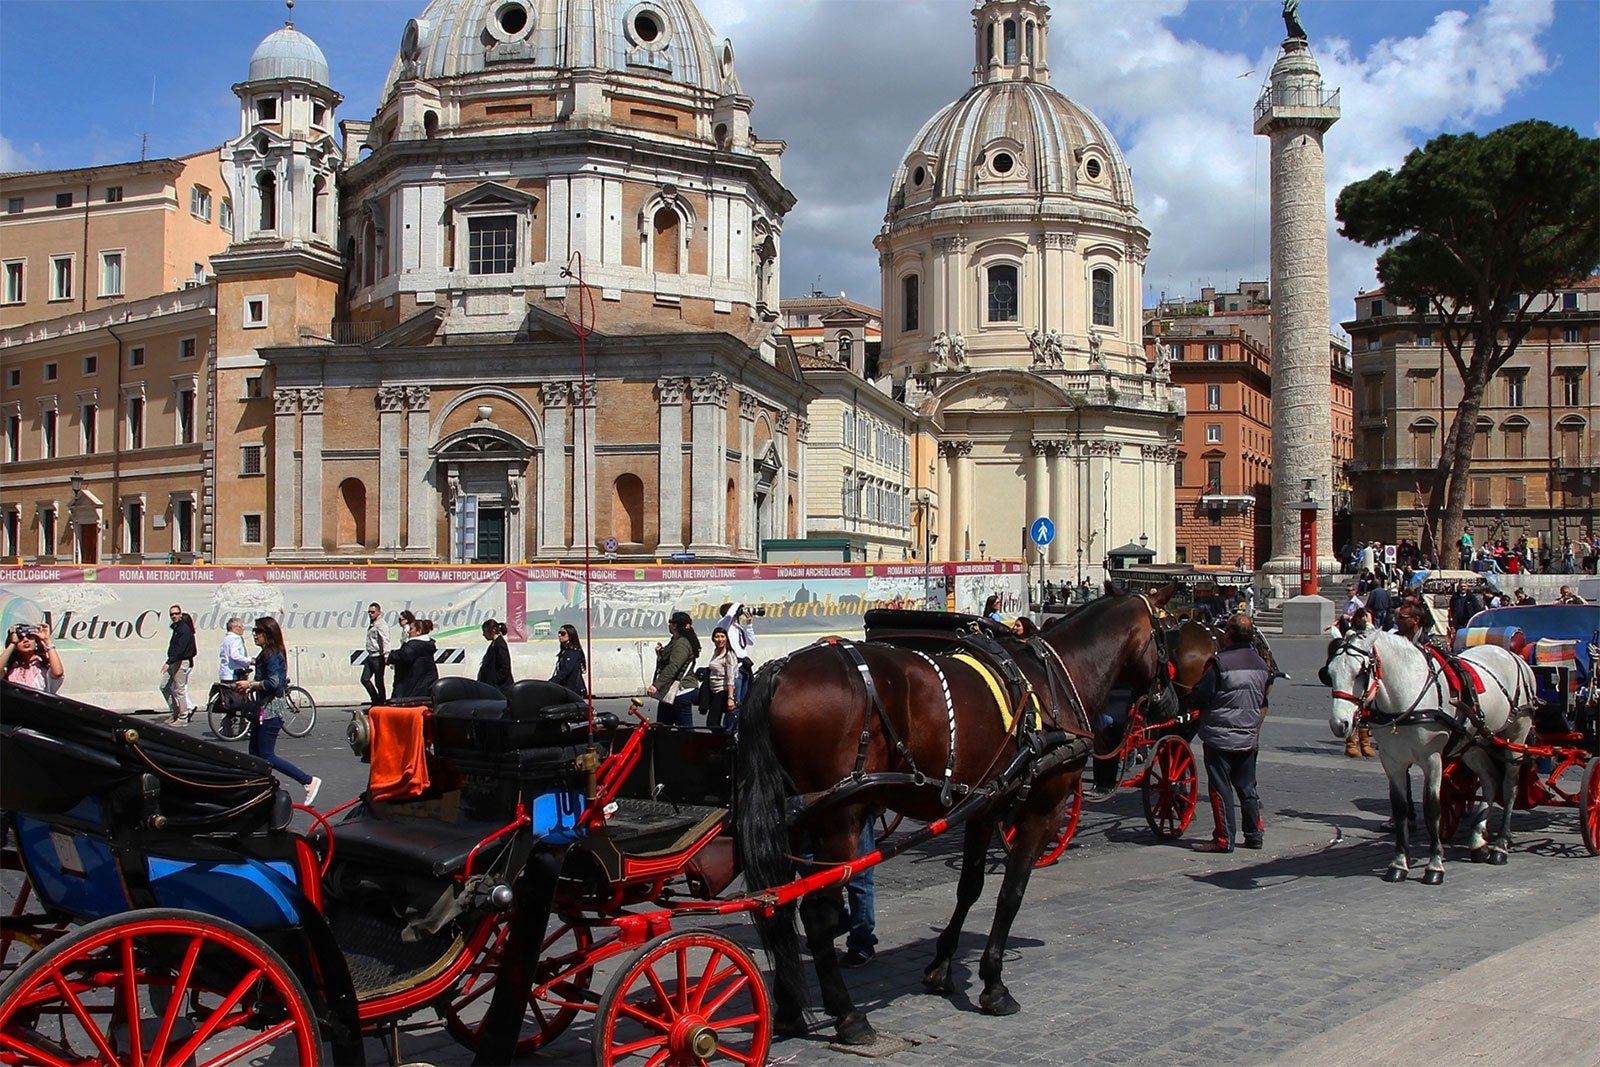 How to ride in a horse carriage in Rome